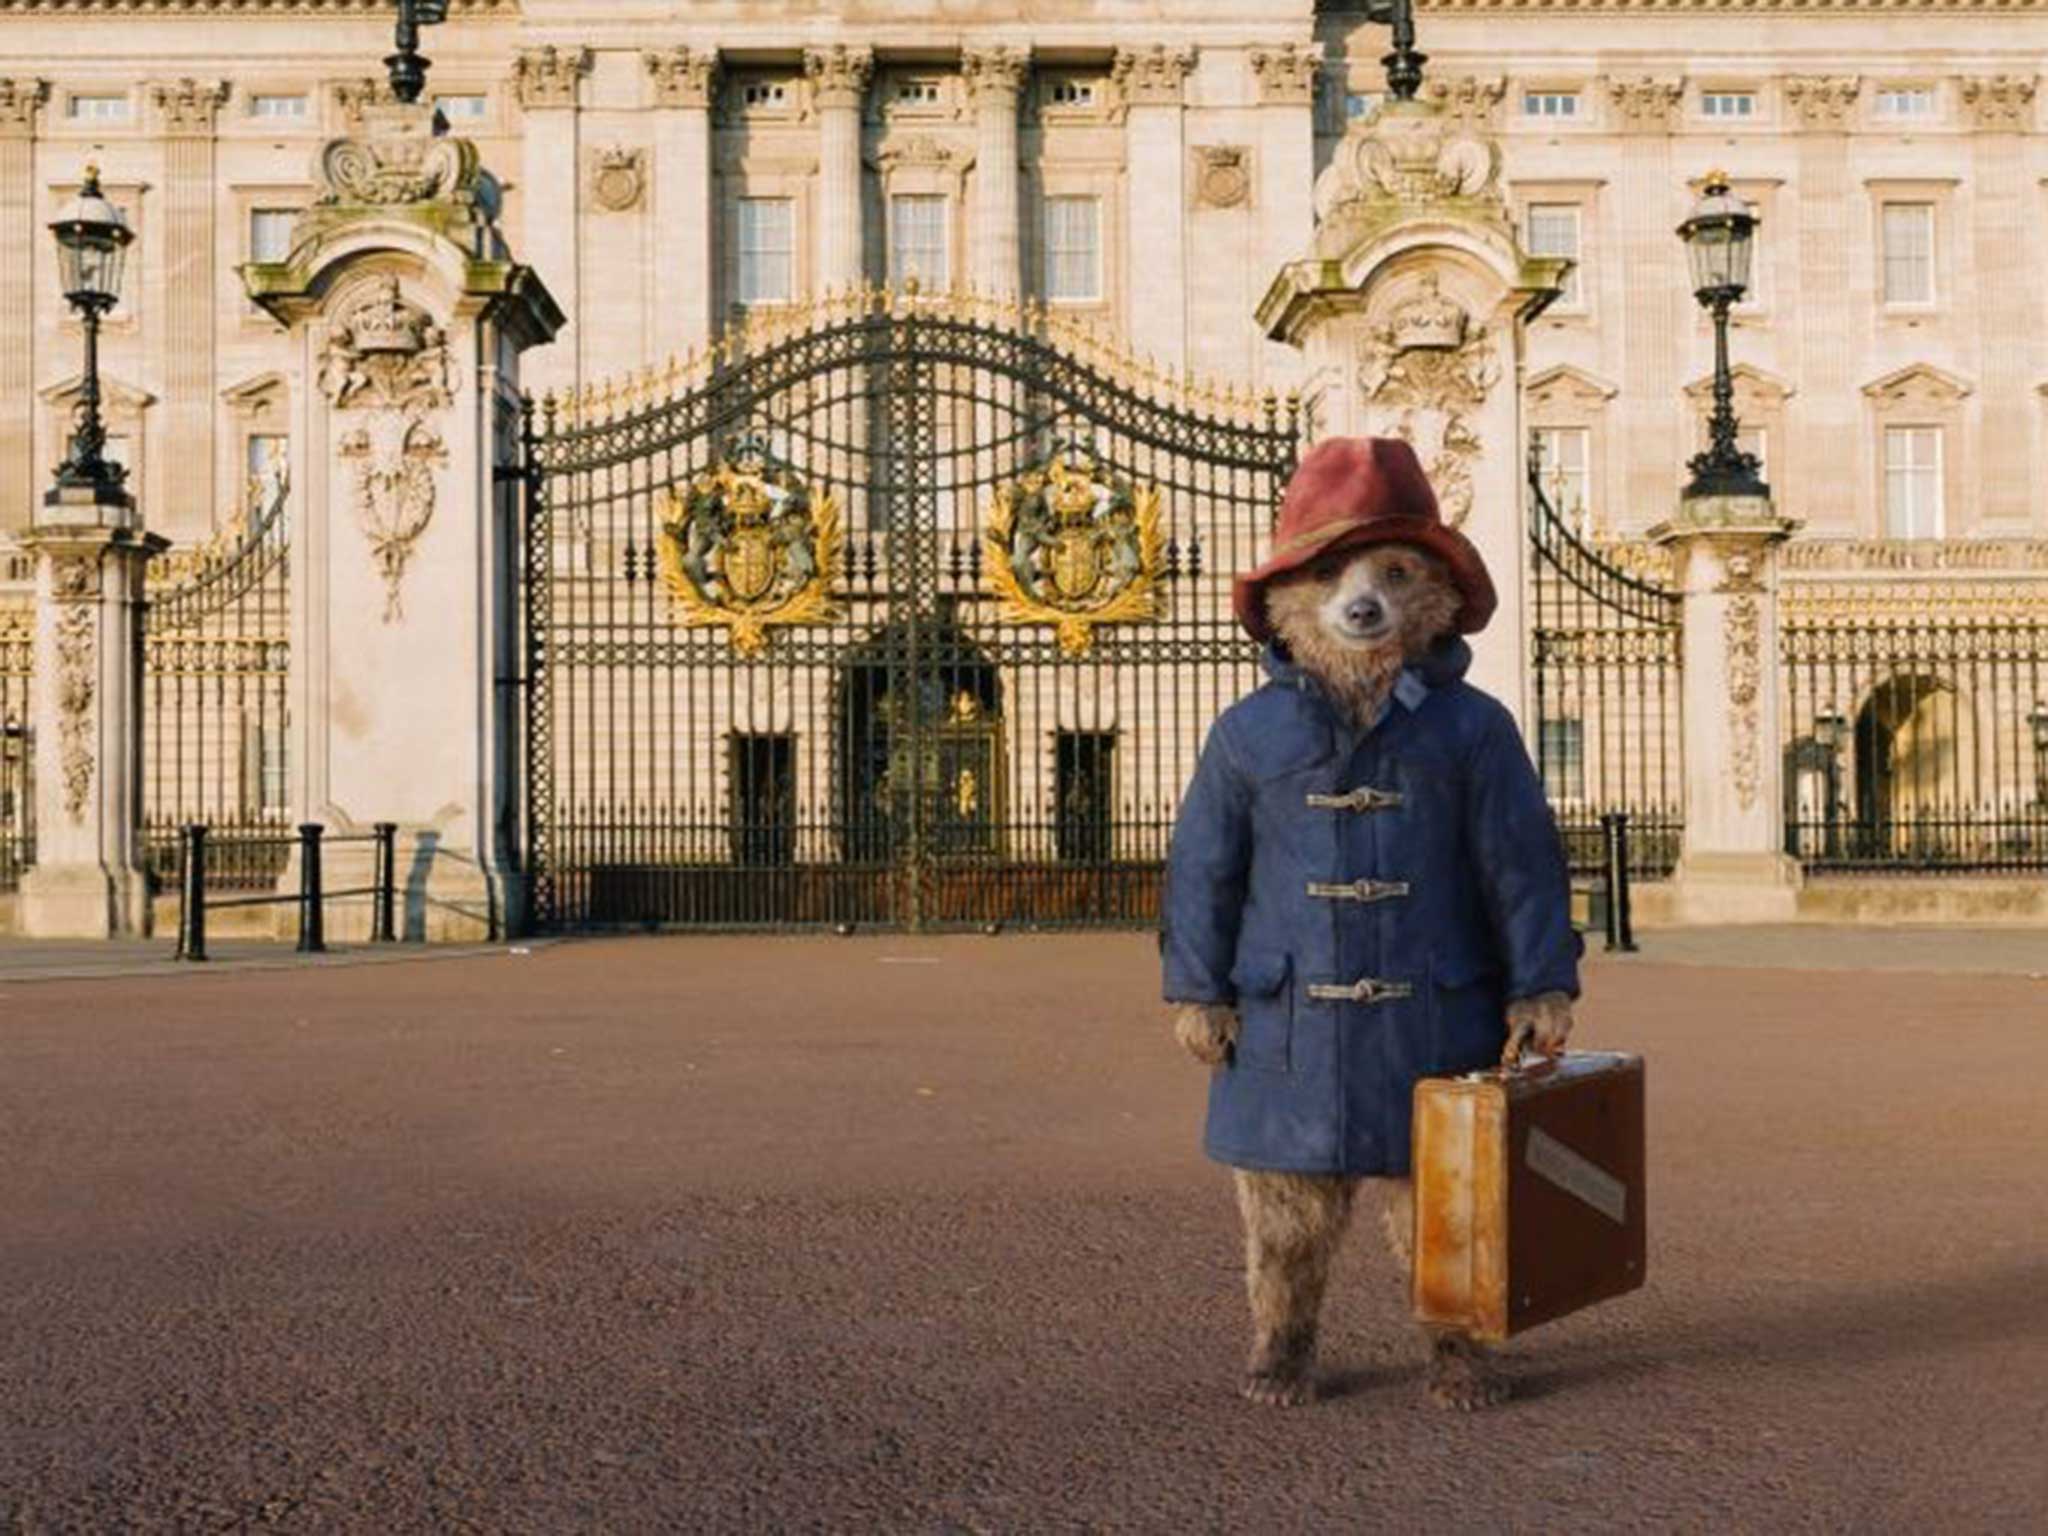 The posters describe Paddington Bear’s illegal route to the UK